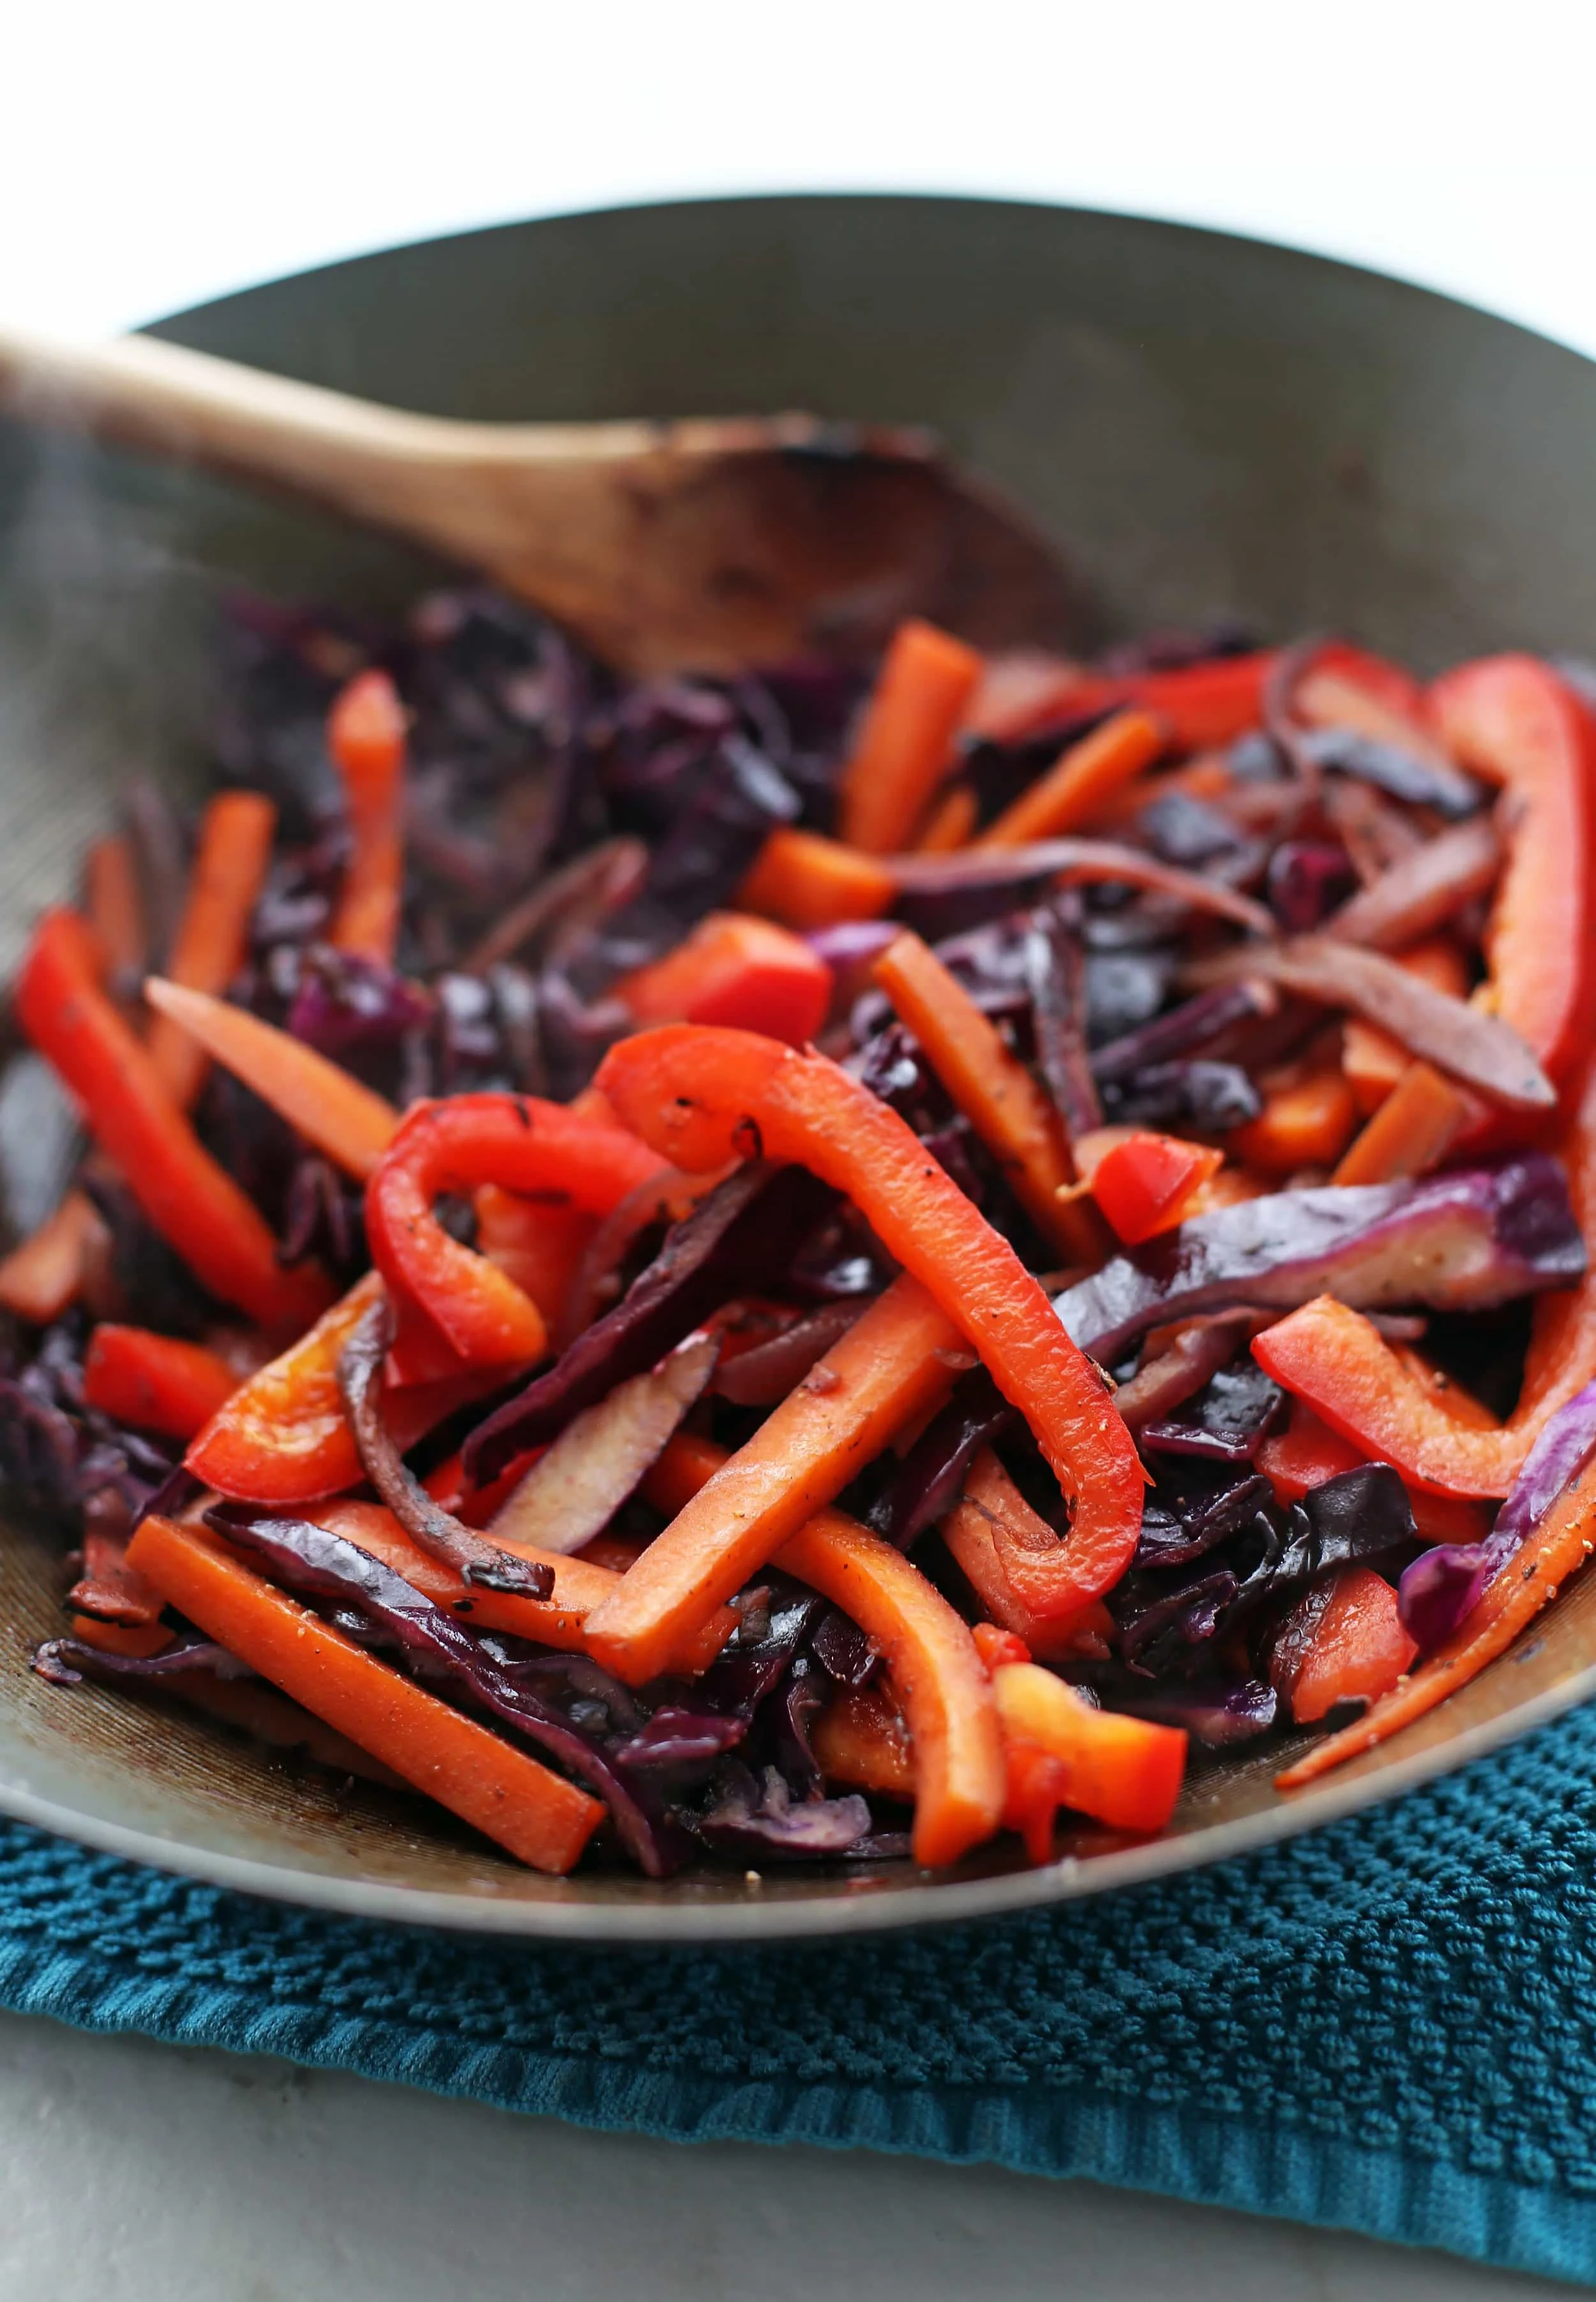 Stir-fried onions, bell pepper, red cabbage, and carrots in a large wok.